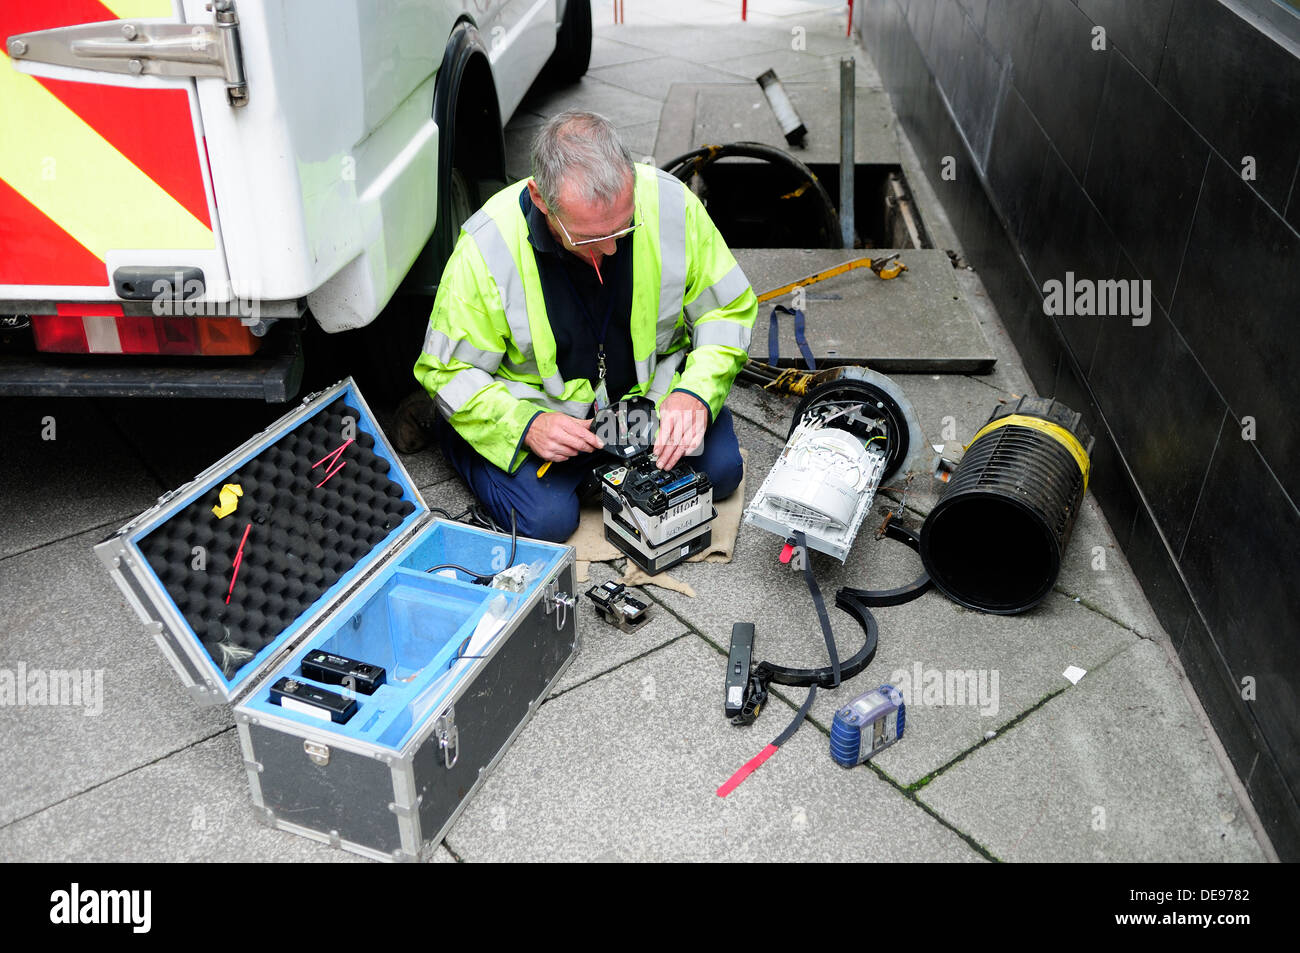 BT Engineer Installing And Repairing Fibre Optic Cable. Stock Photo